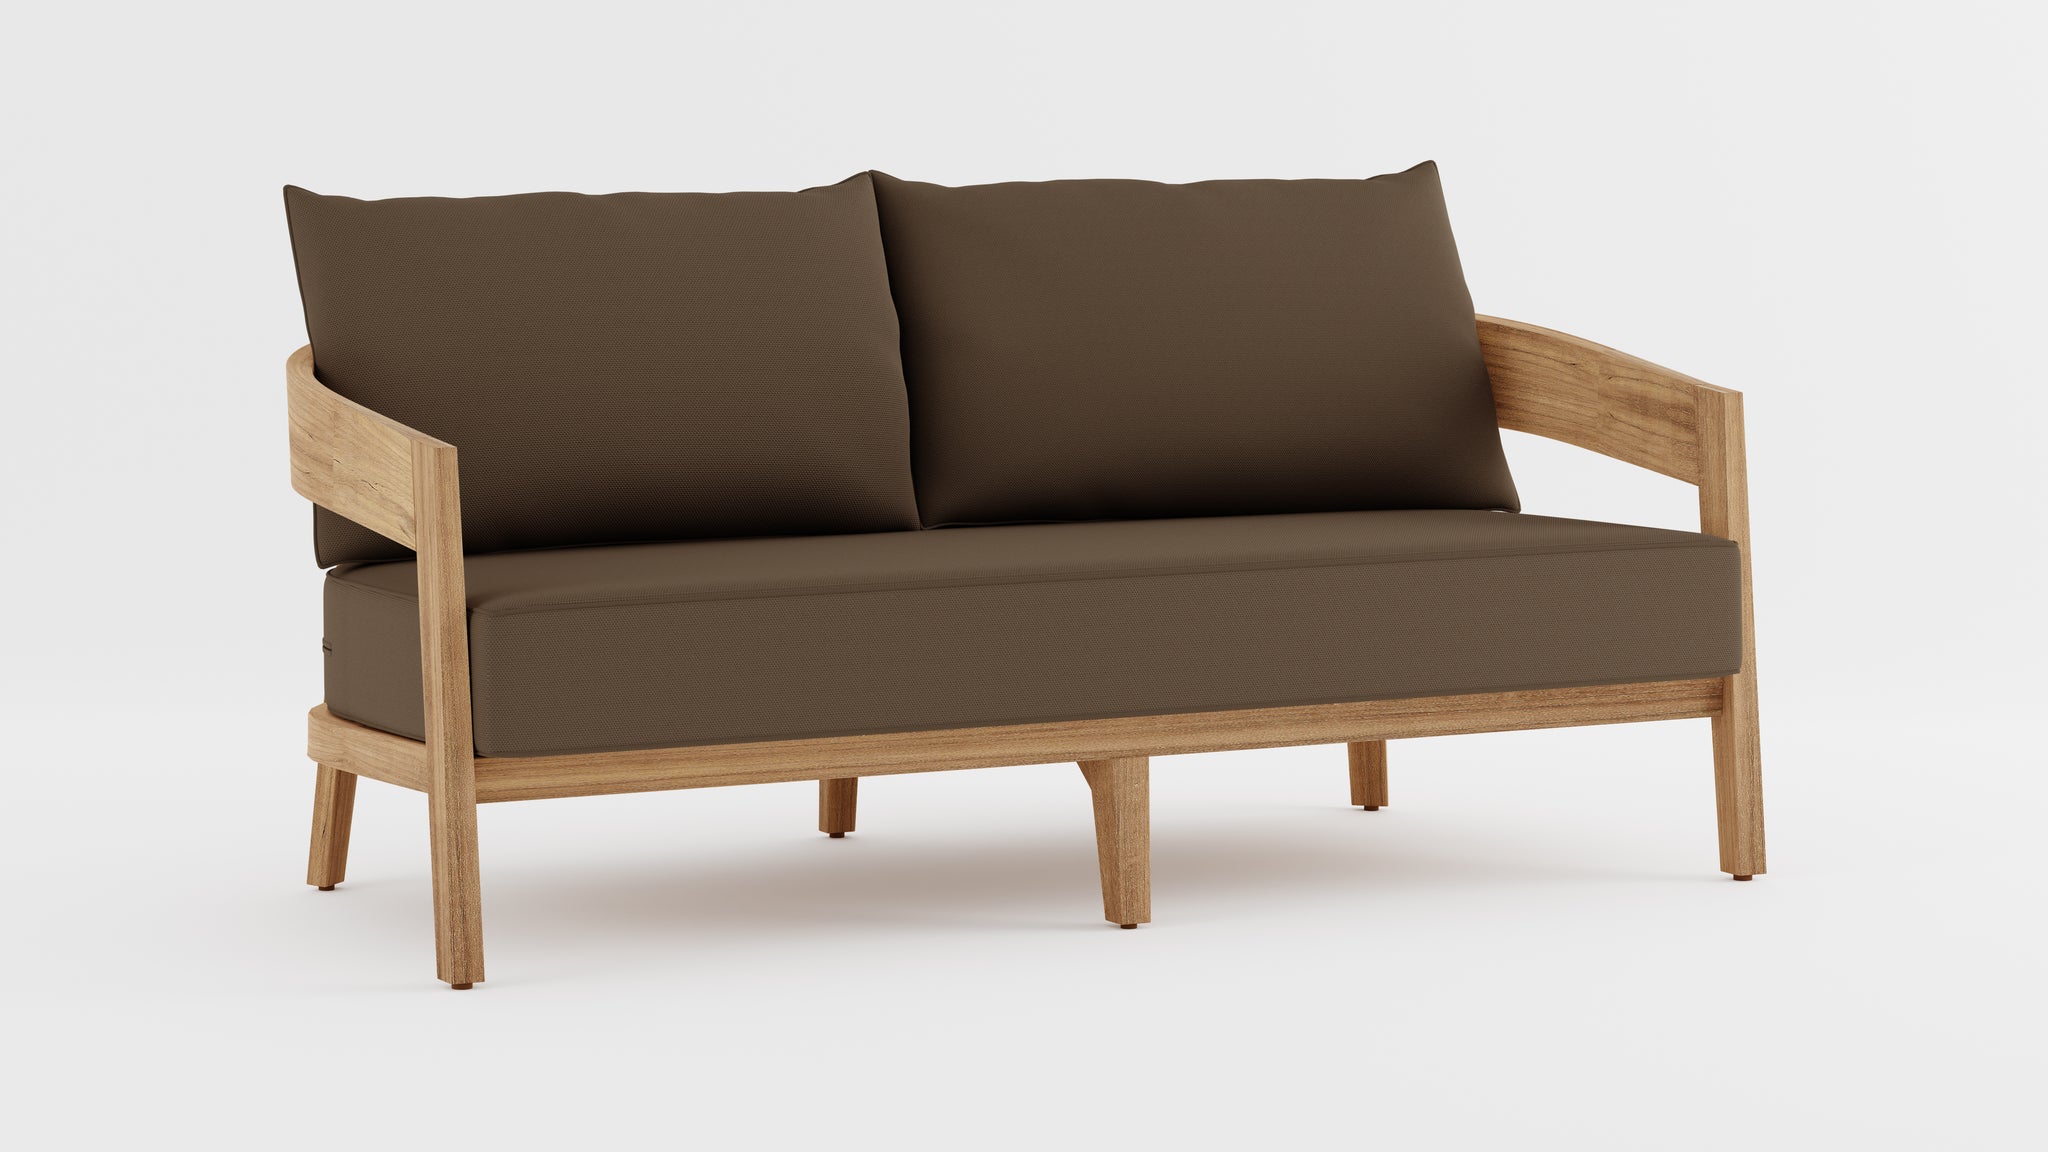 The Windsor Outdoor Teak Lounge 2 Seater Sofa  with Taupe Cushions